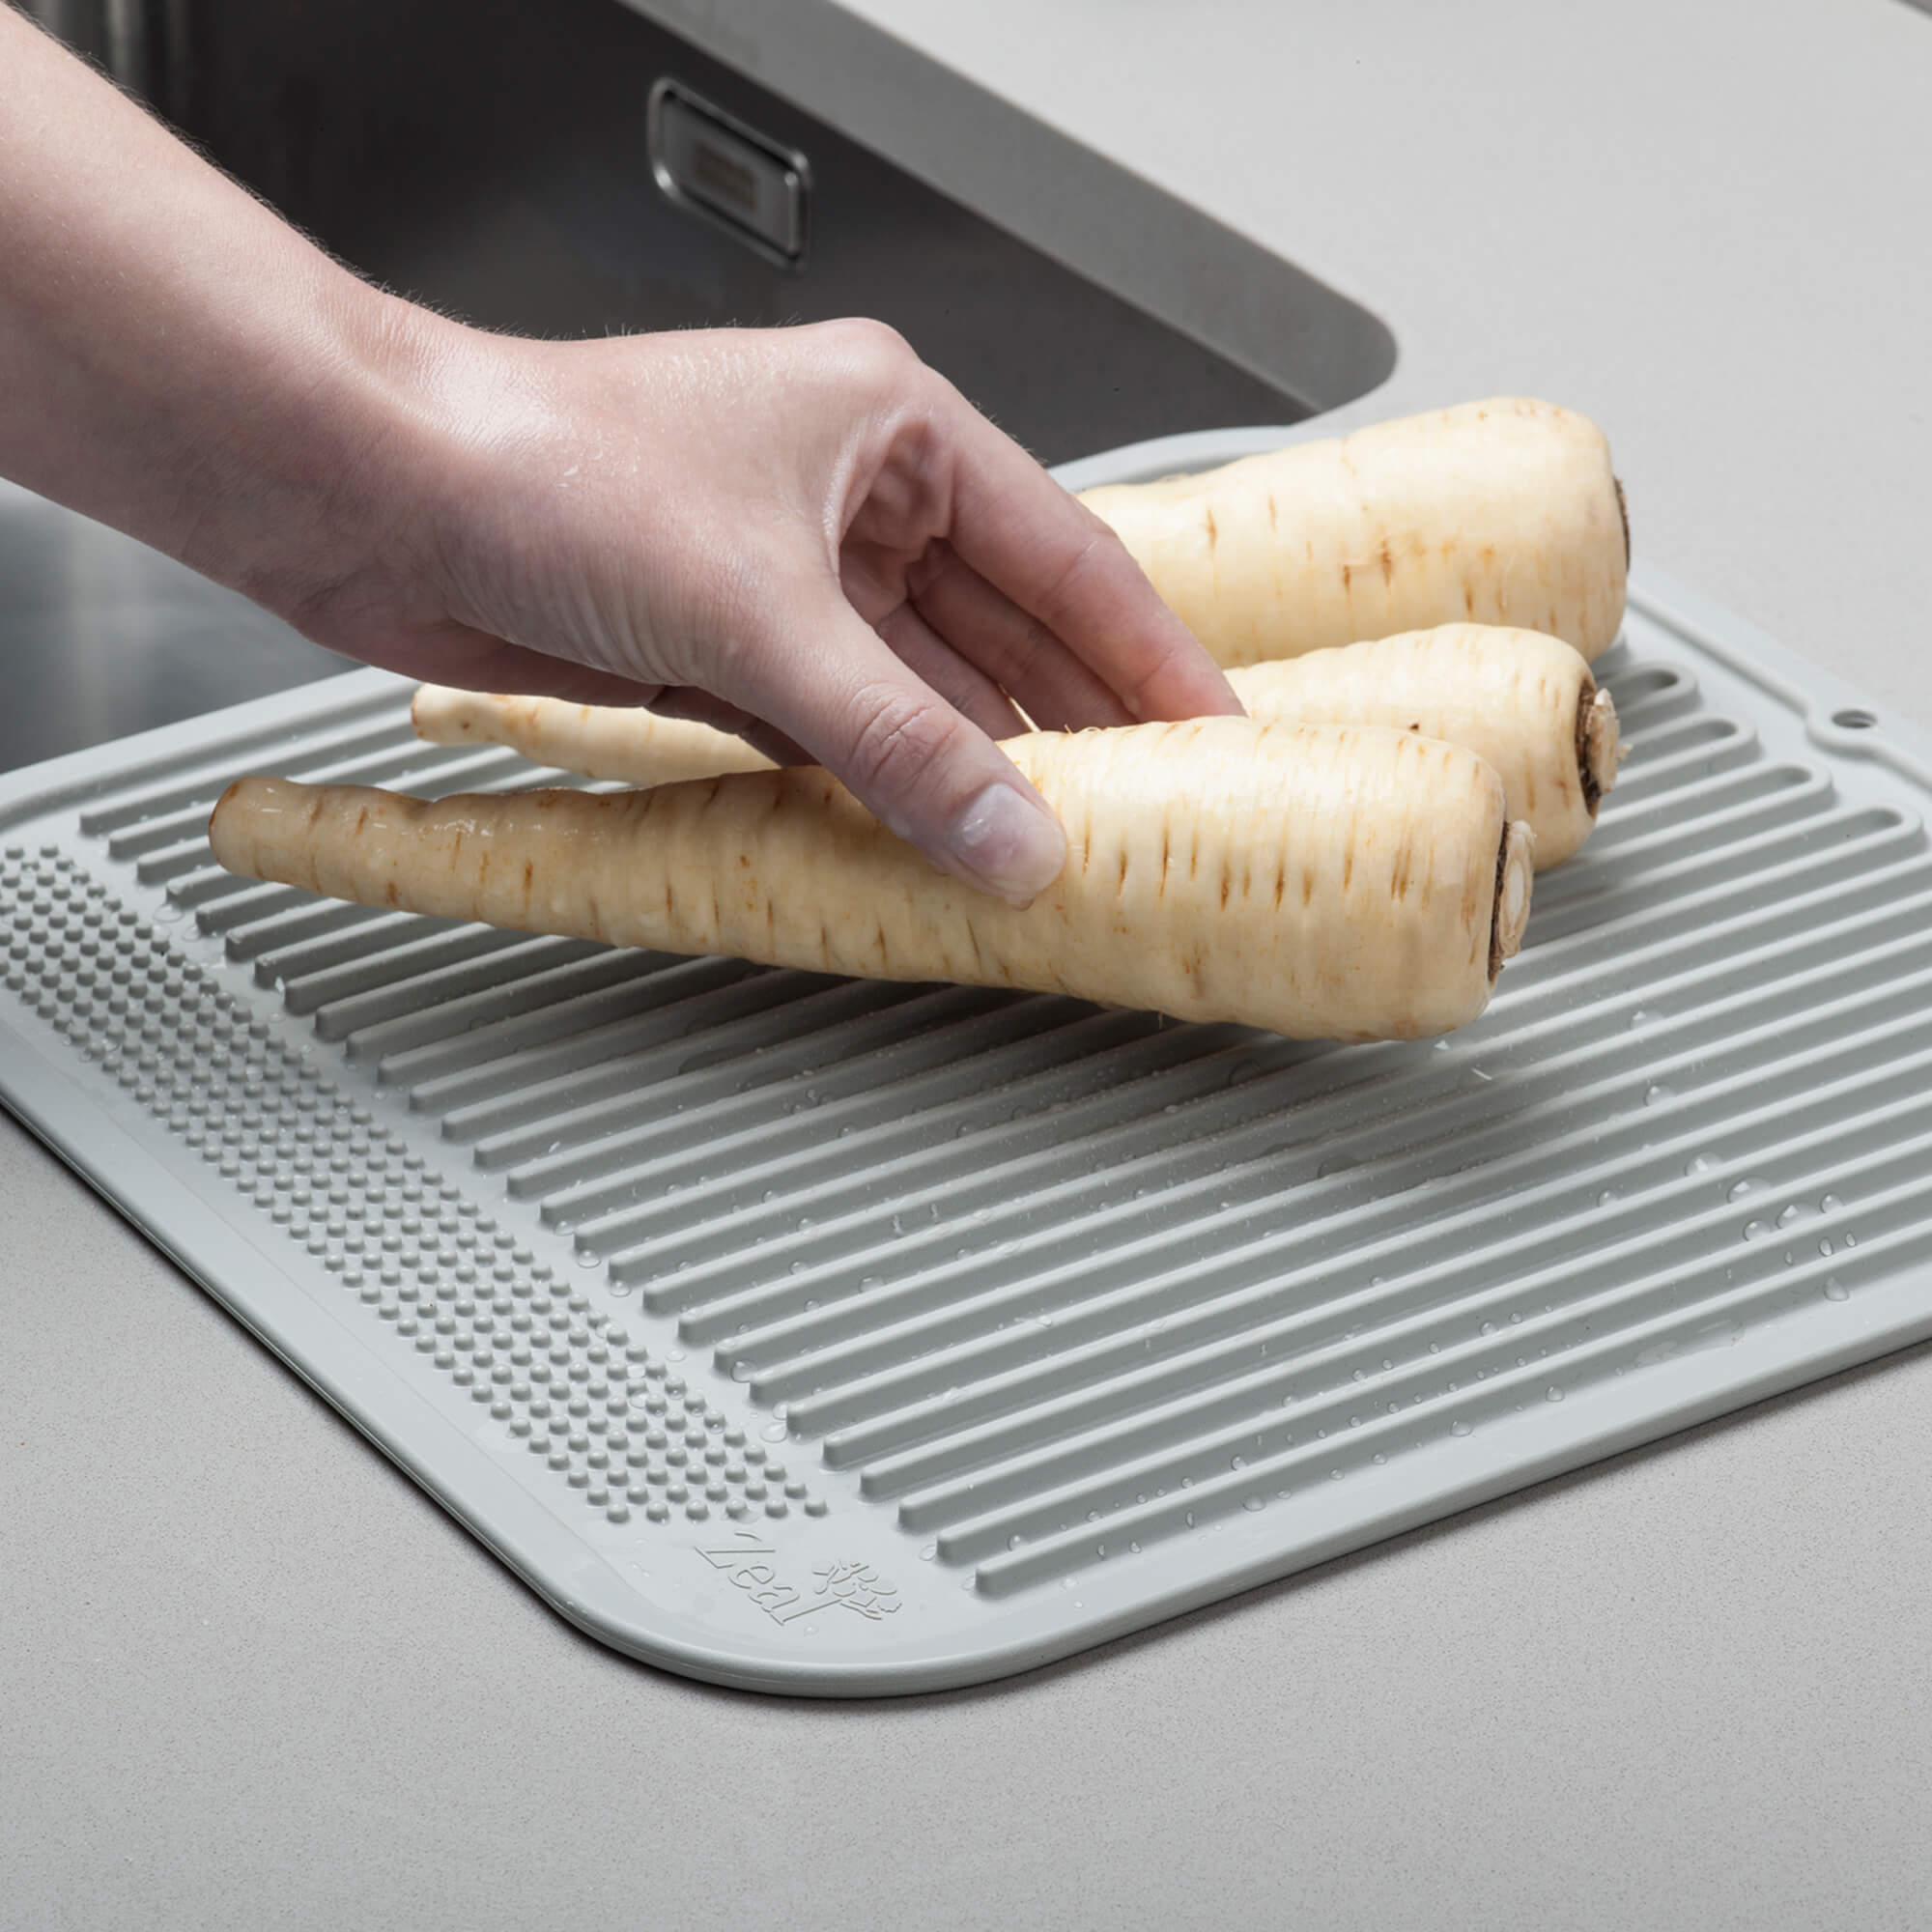 Zeal Silicone Draining Mat with washed vegetables